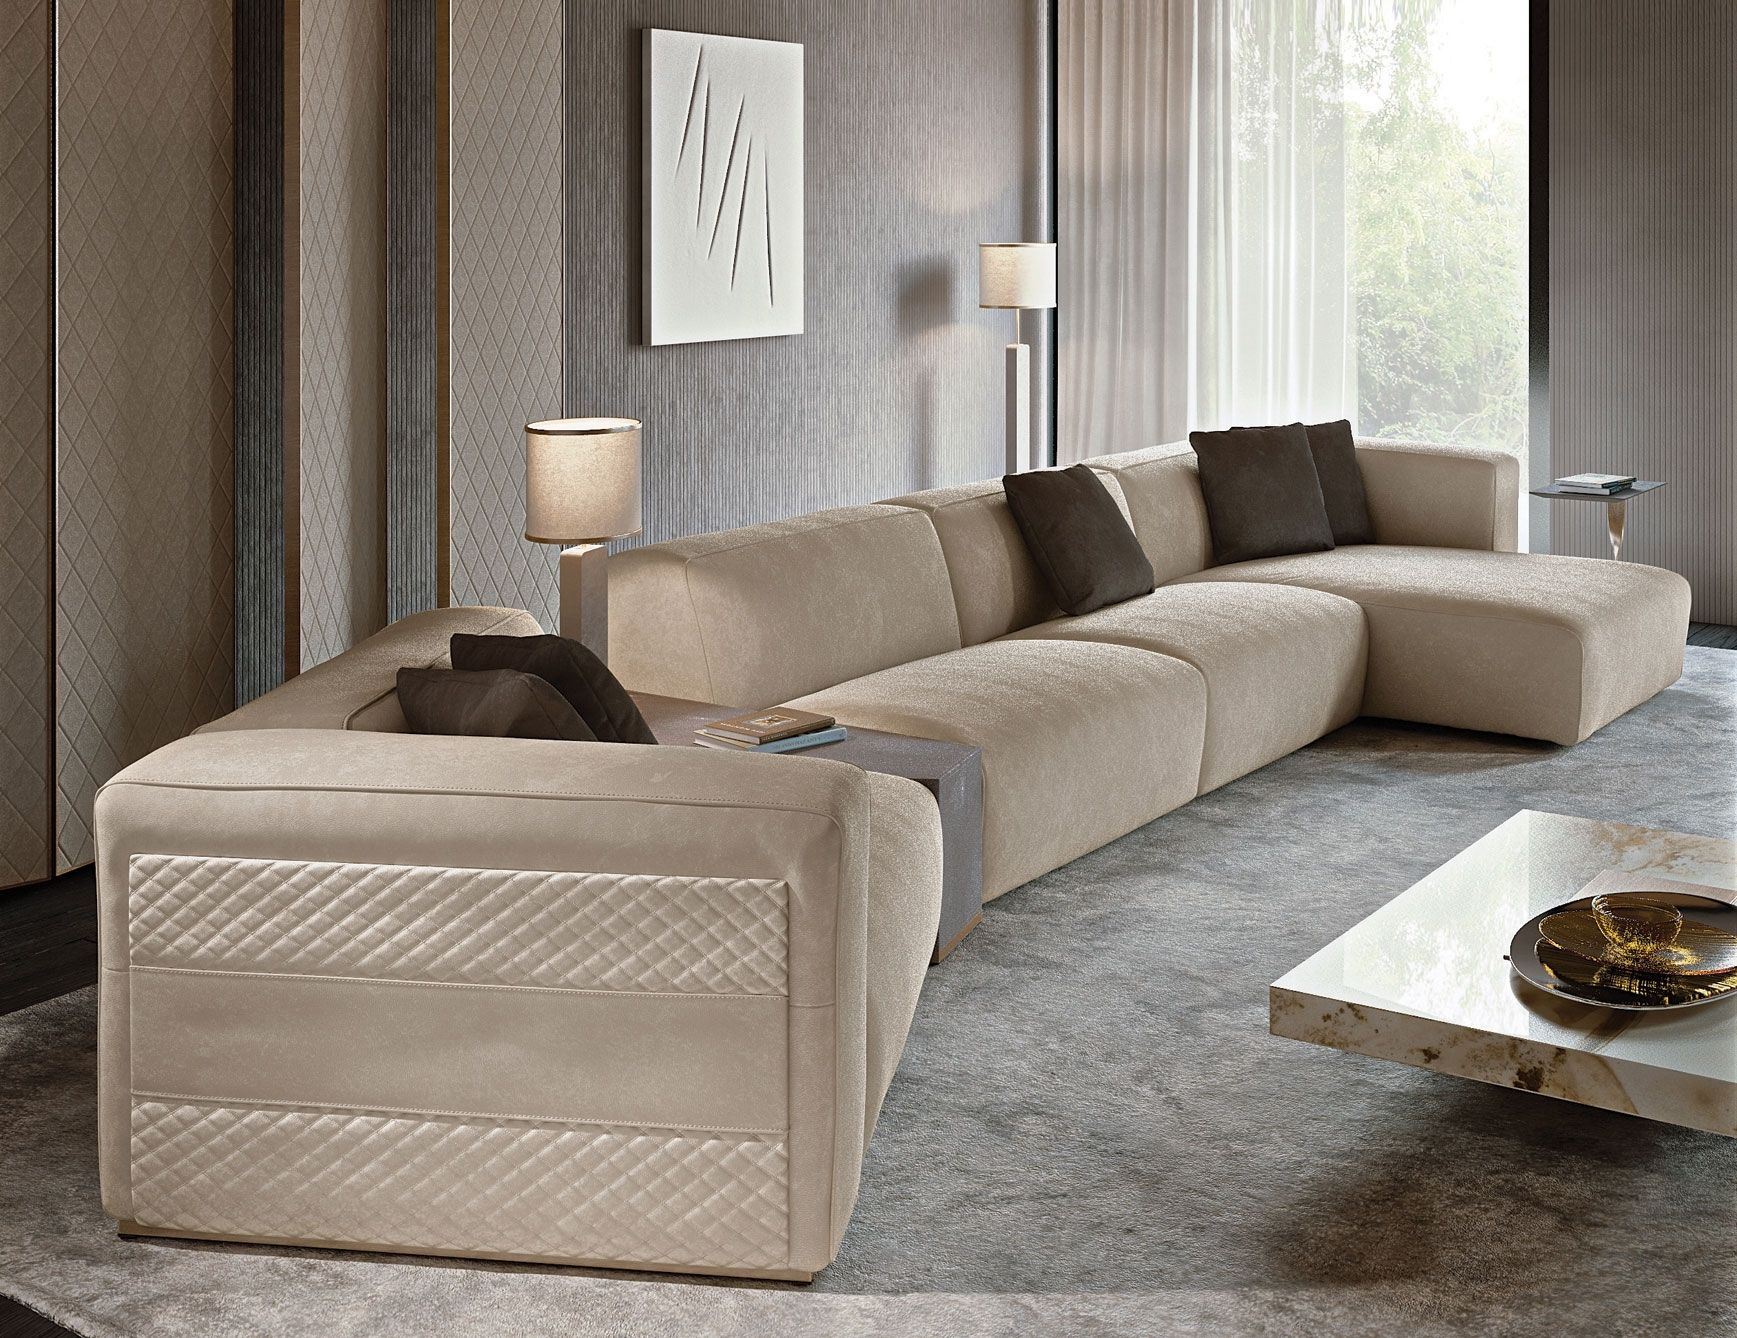 Luxury Sofa Manufacturers Uk | Conceptstructuresllc Within High Quality Sectional Sofas (Photo 9 of 10)